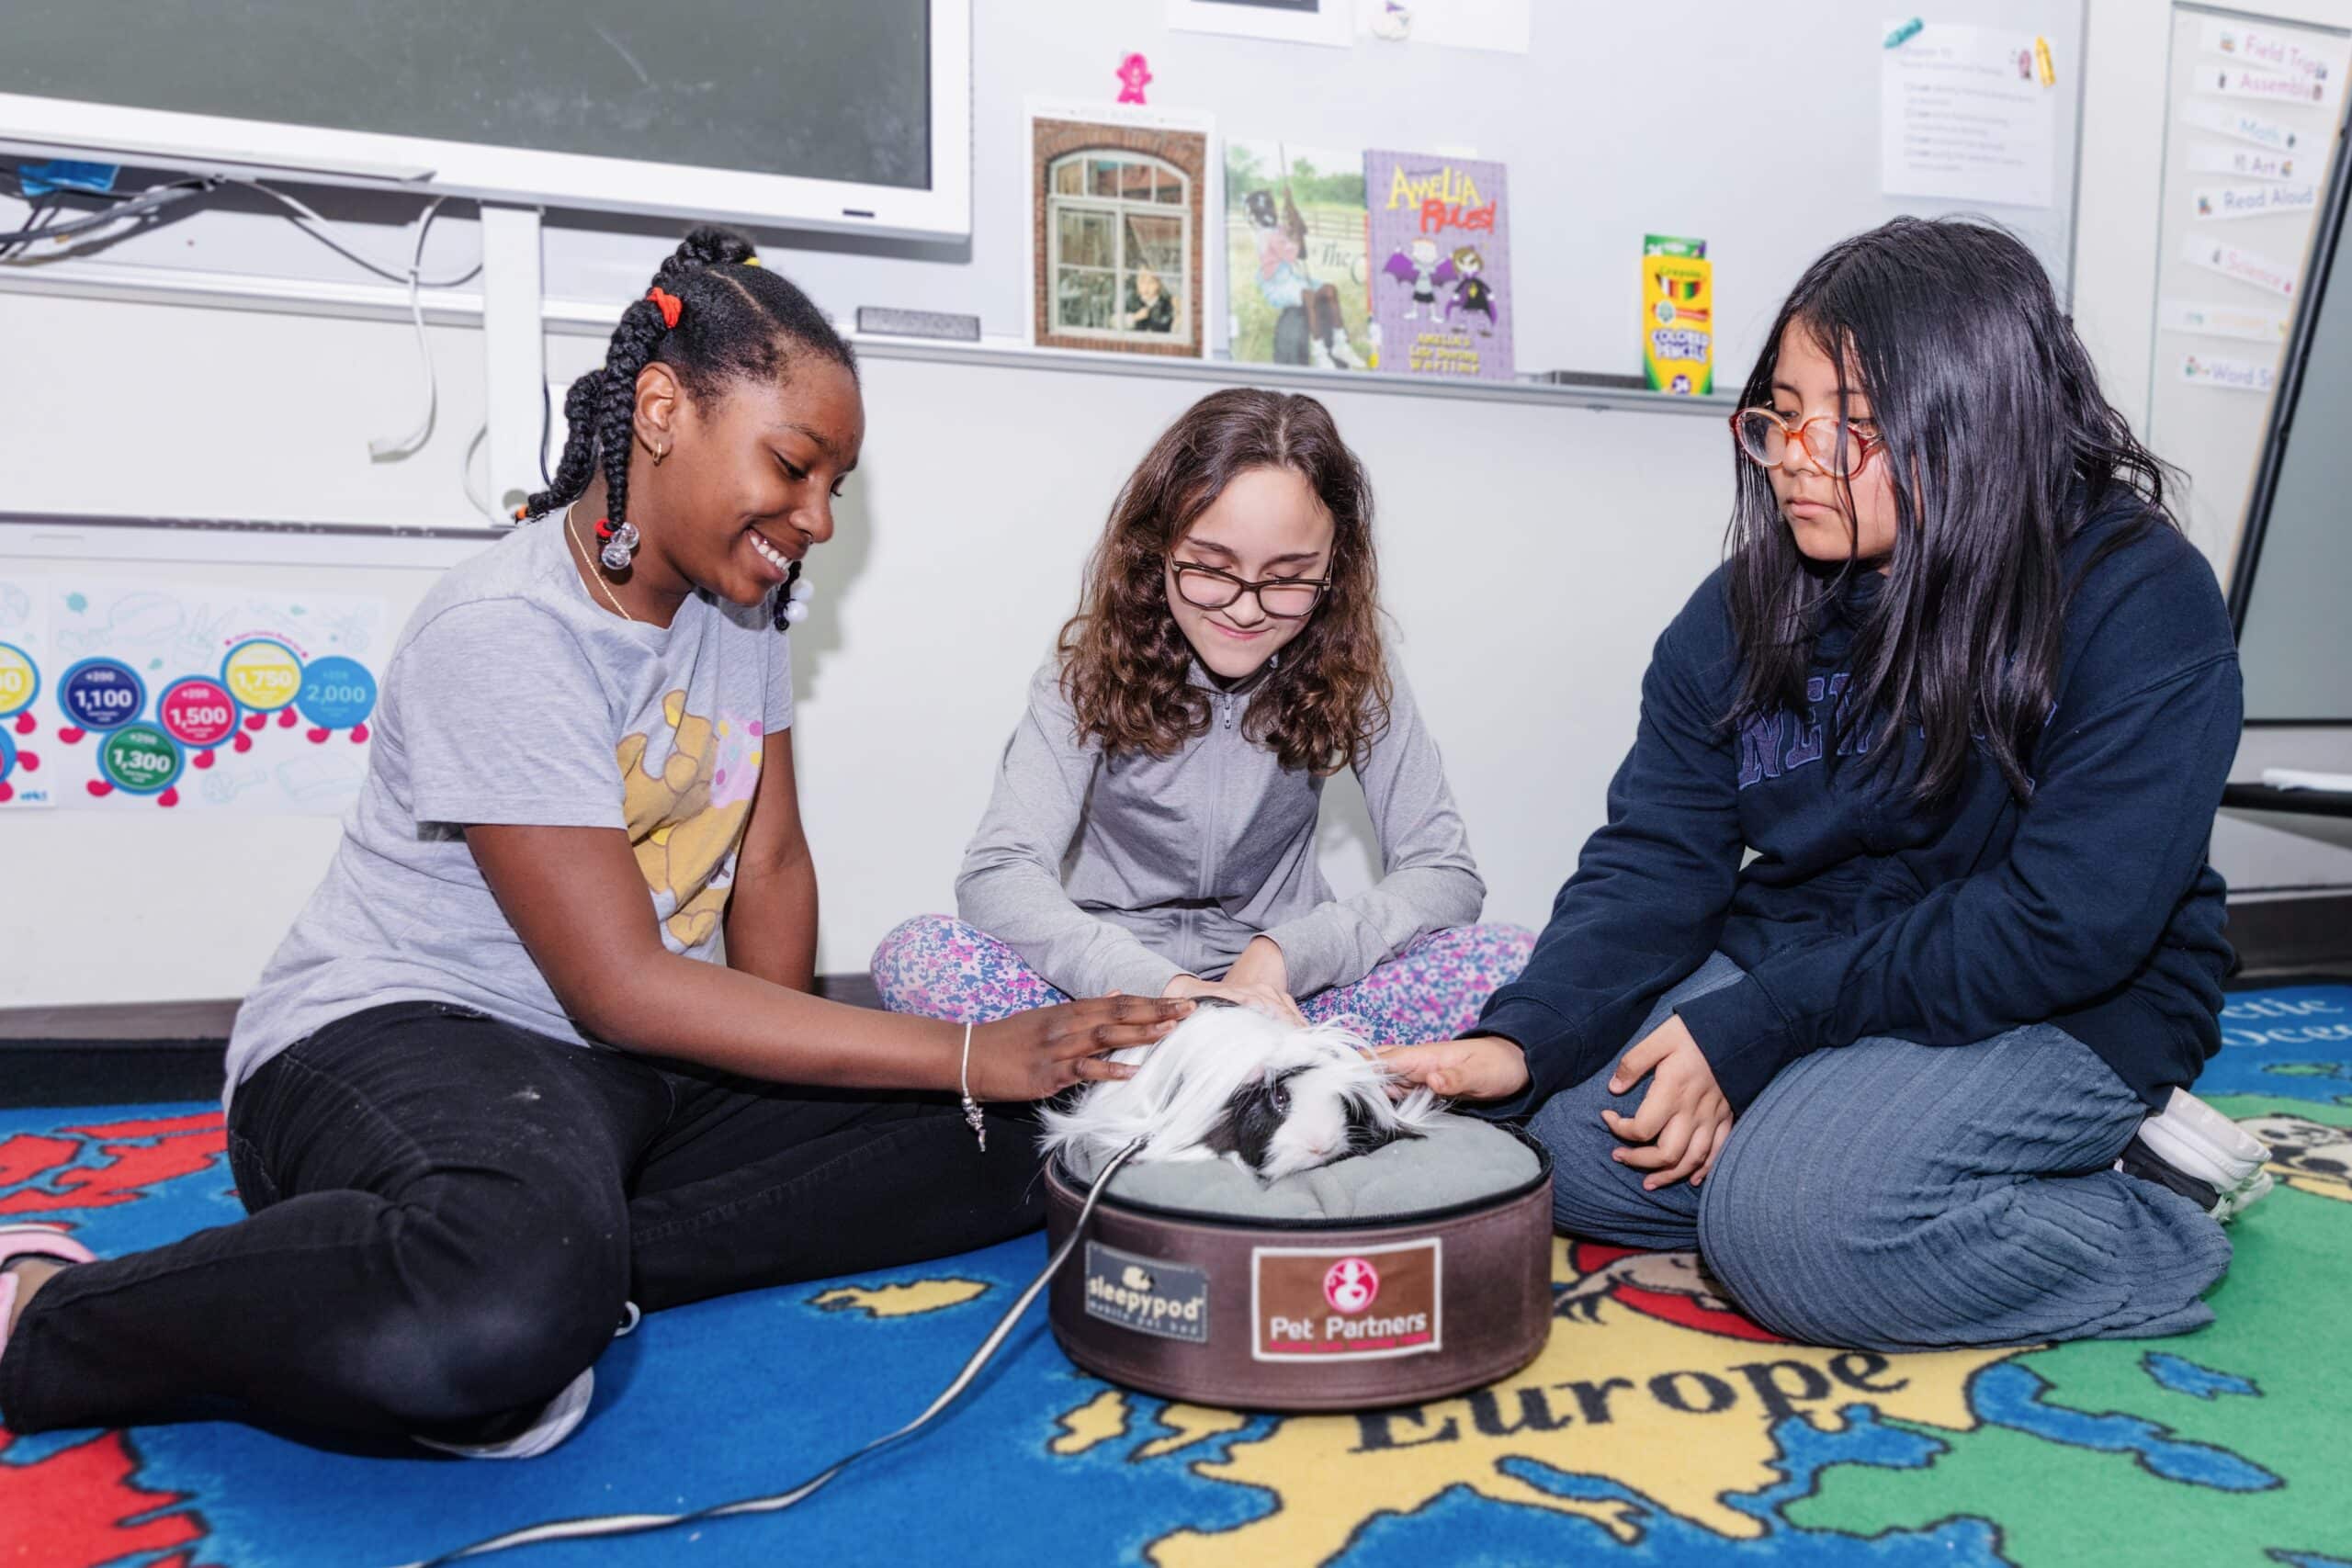 Three young girls pet a therapy guinea pig during a visit in their classroom.